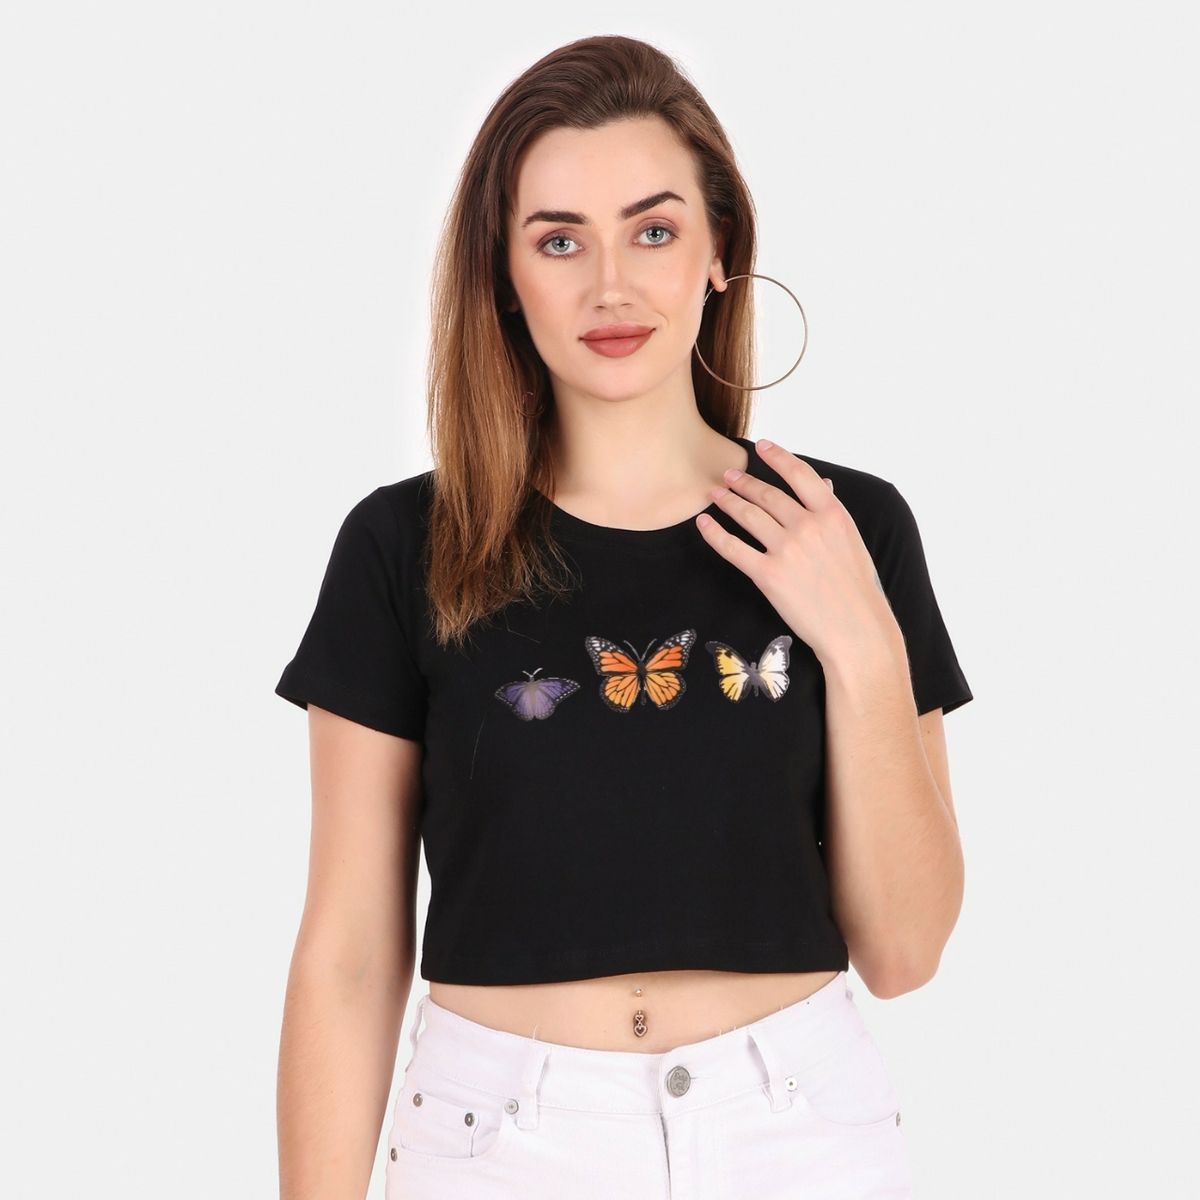 For a confidence-boosting, this Printed CROP TOP from Trendy